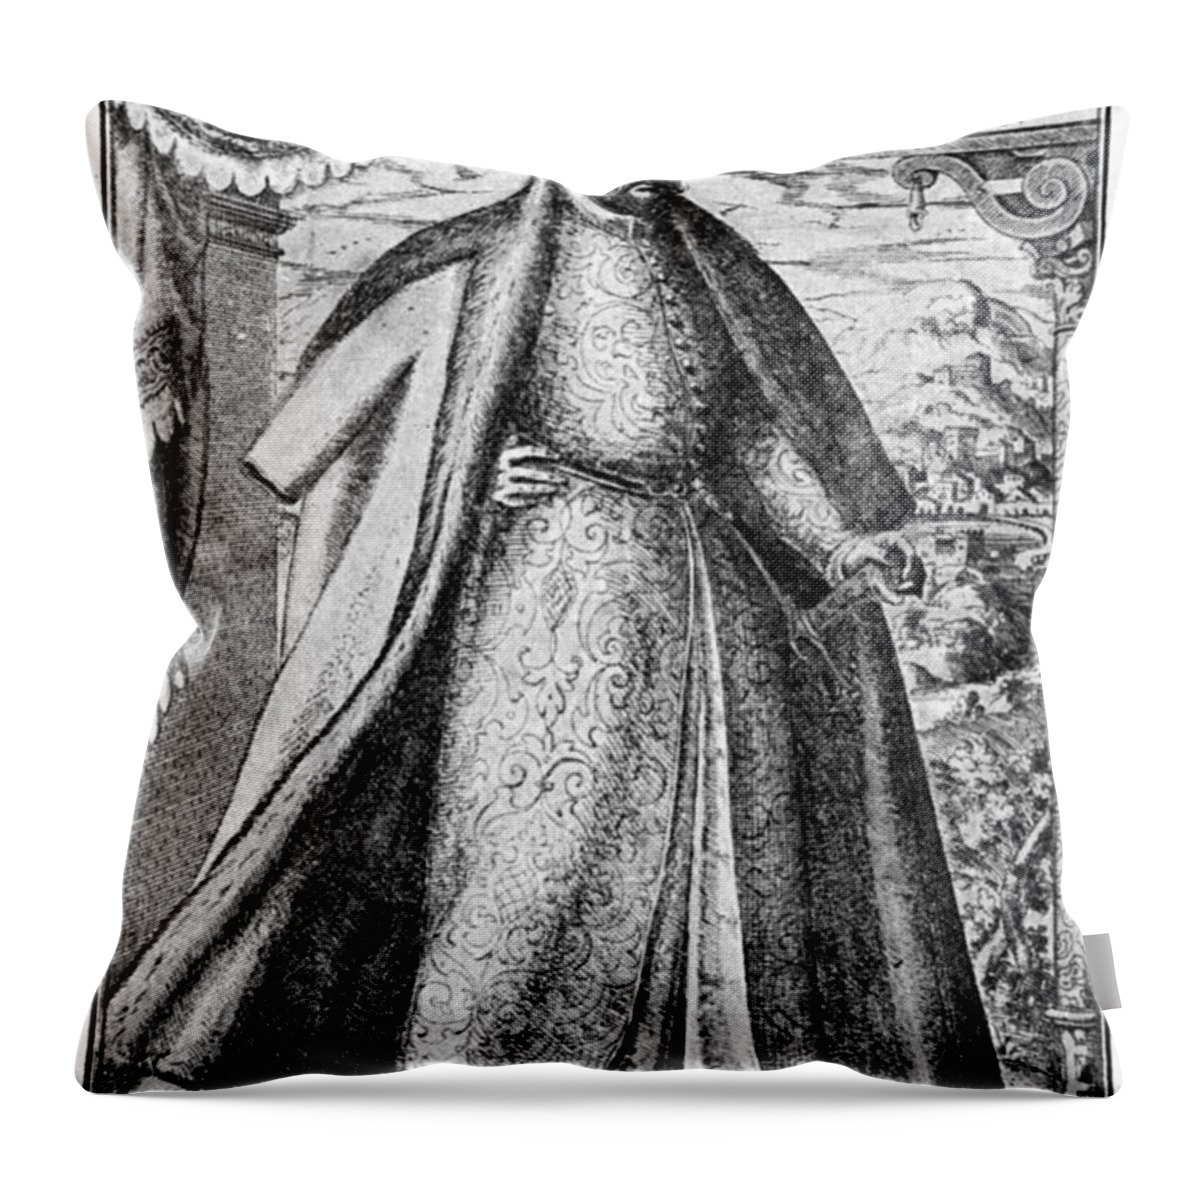 1576 Throw Pillow featuring the drawing Stephen Bathory by Jost Amman